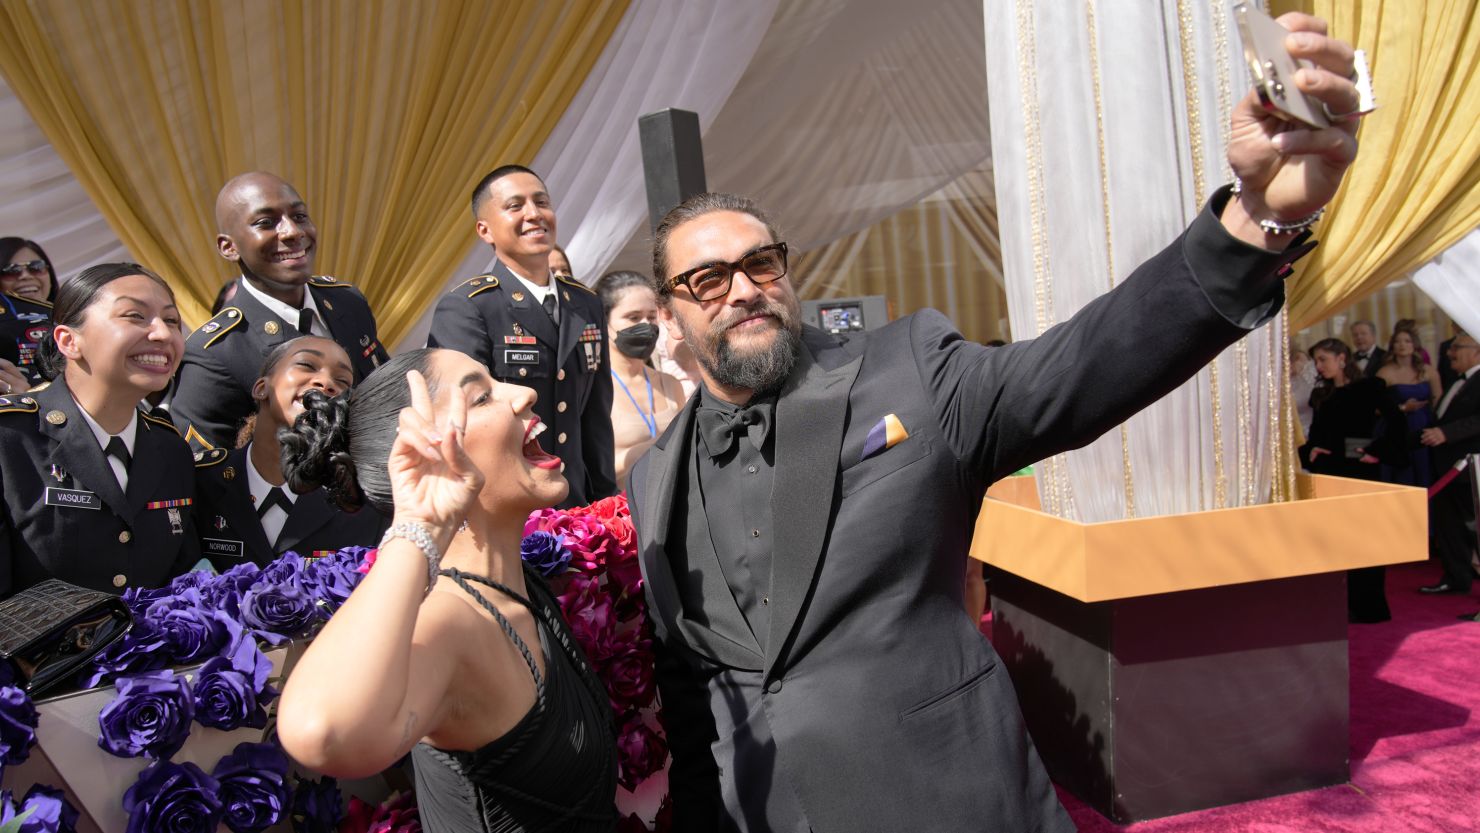 Stephanie Beatriz, left, and Jason Momoa take a photograph with members of the military at the Oscars on Sunday,